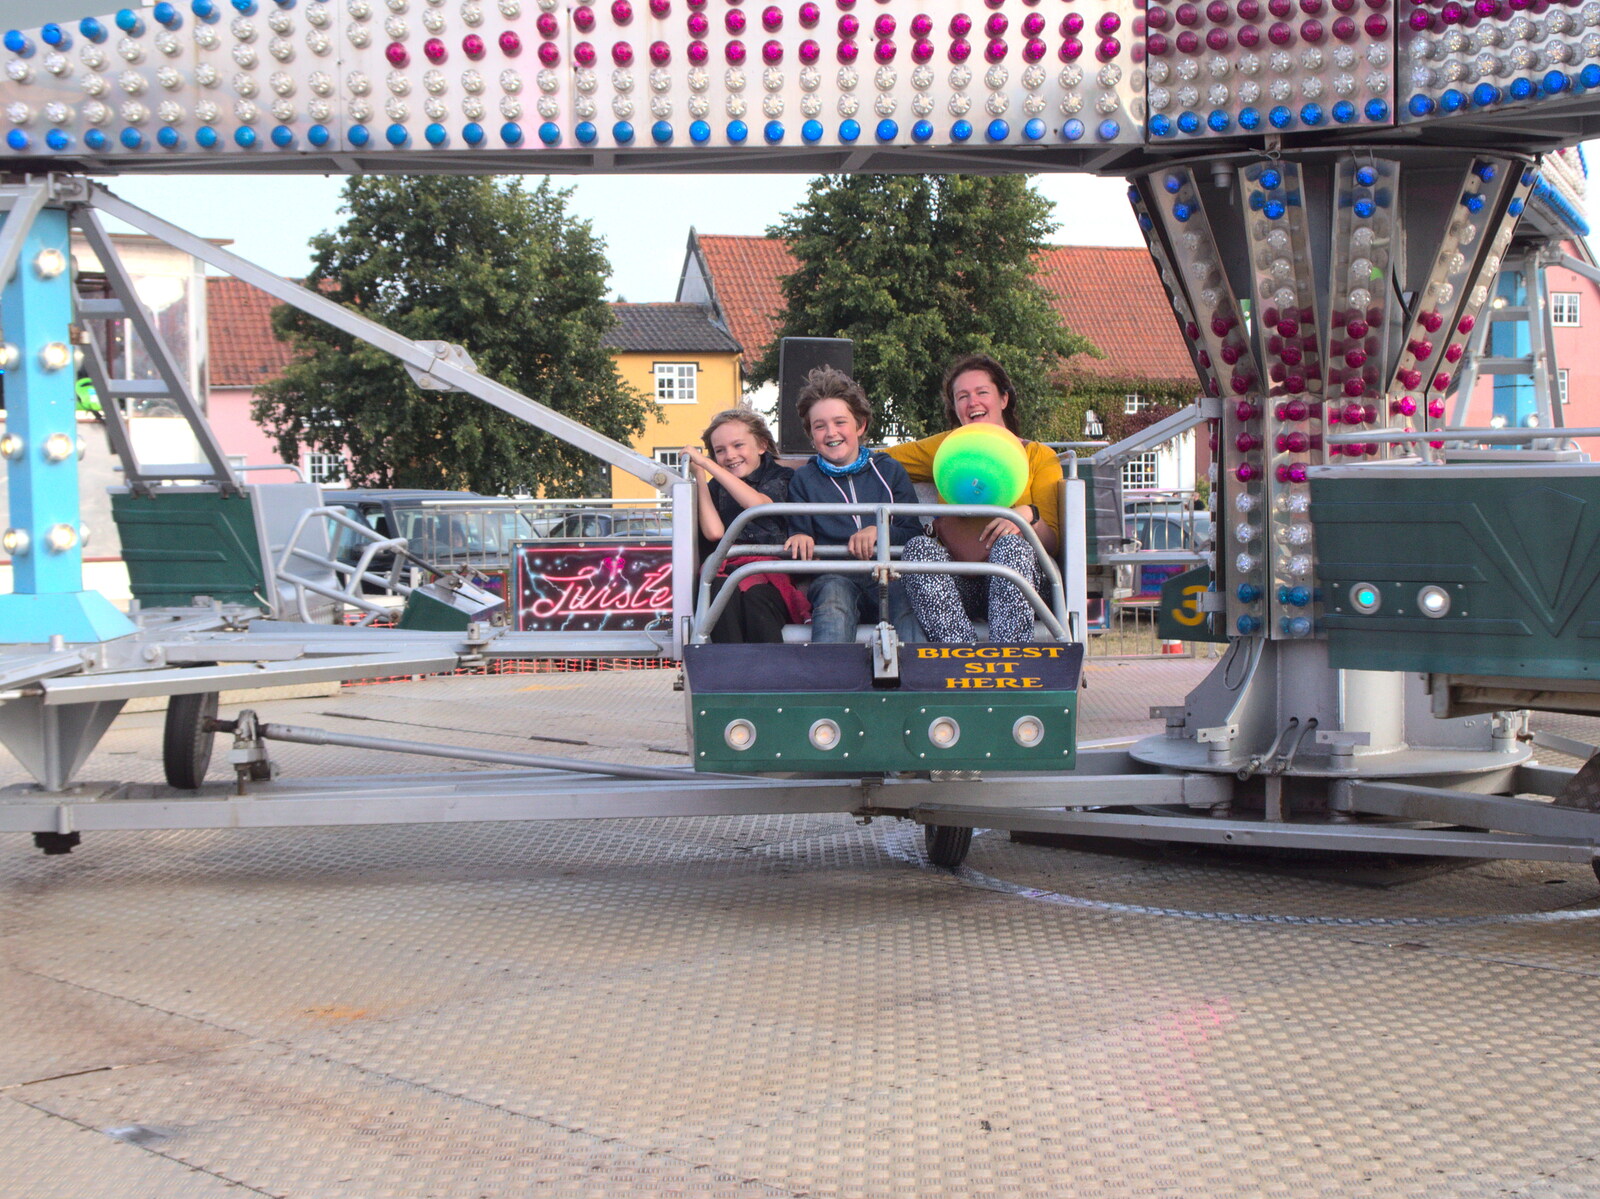 More spinning action from A Few Hours at the Fair, Fair Green, Diss, Norfolk - 5th September 2021